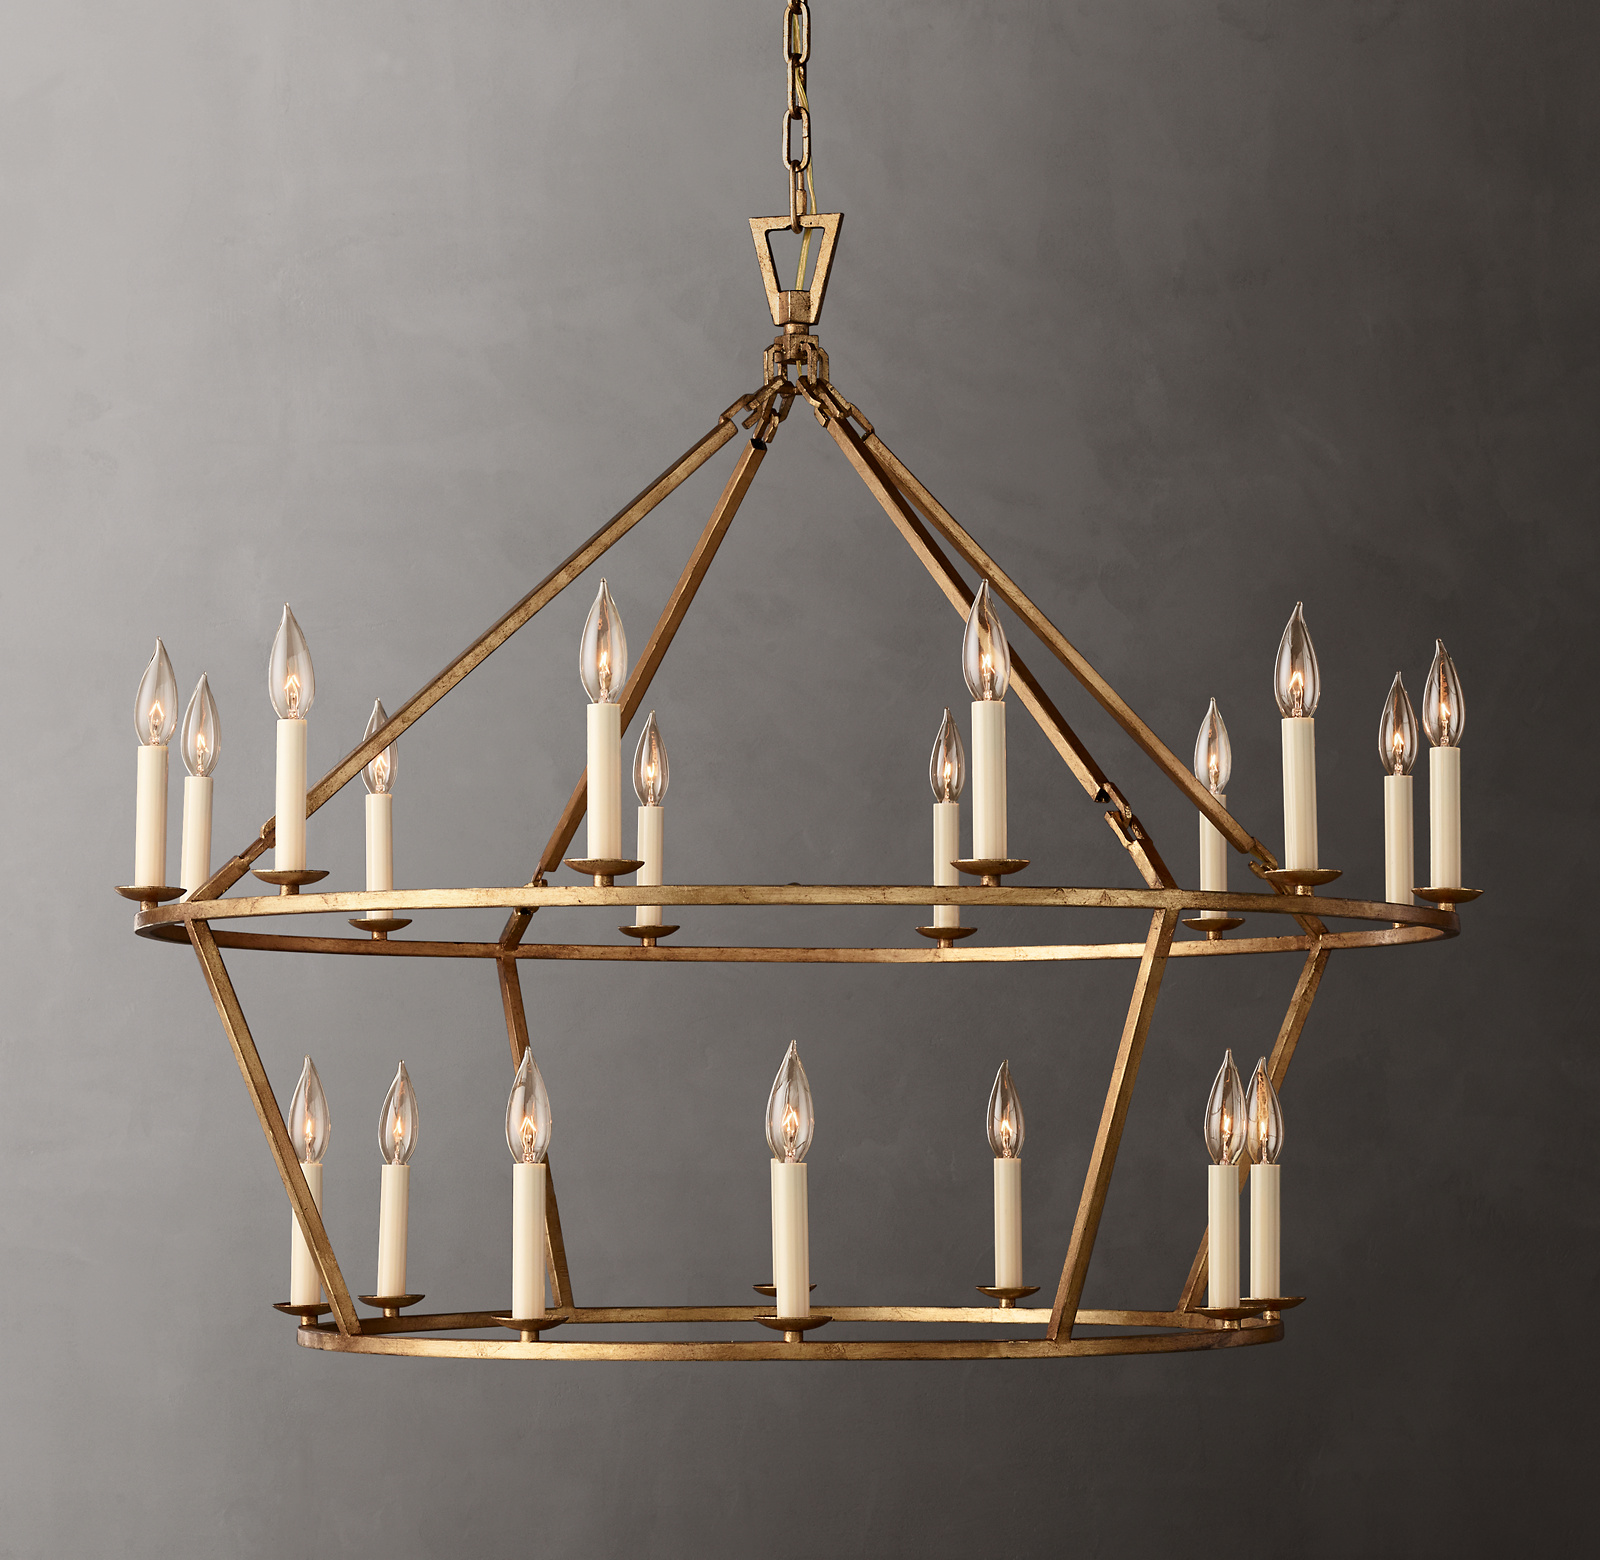 Shown in Gilded Iron with ivory candle sleeves (included).